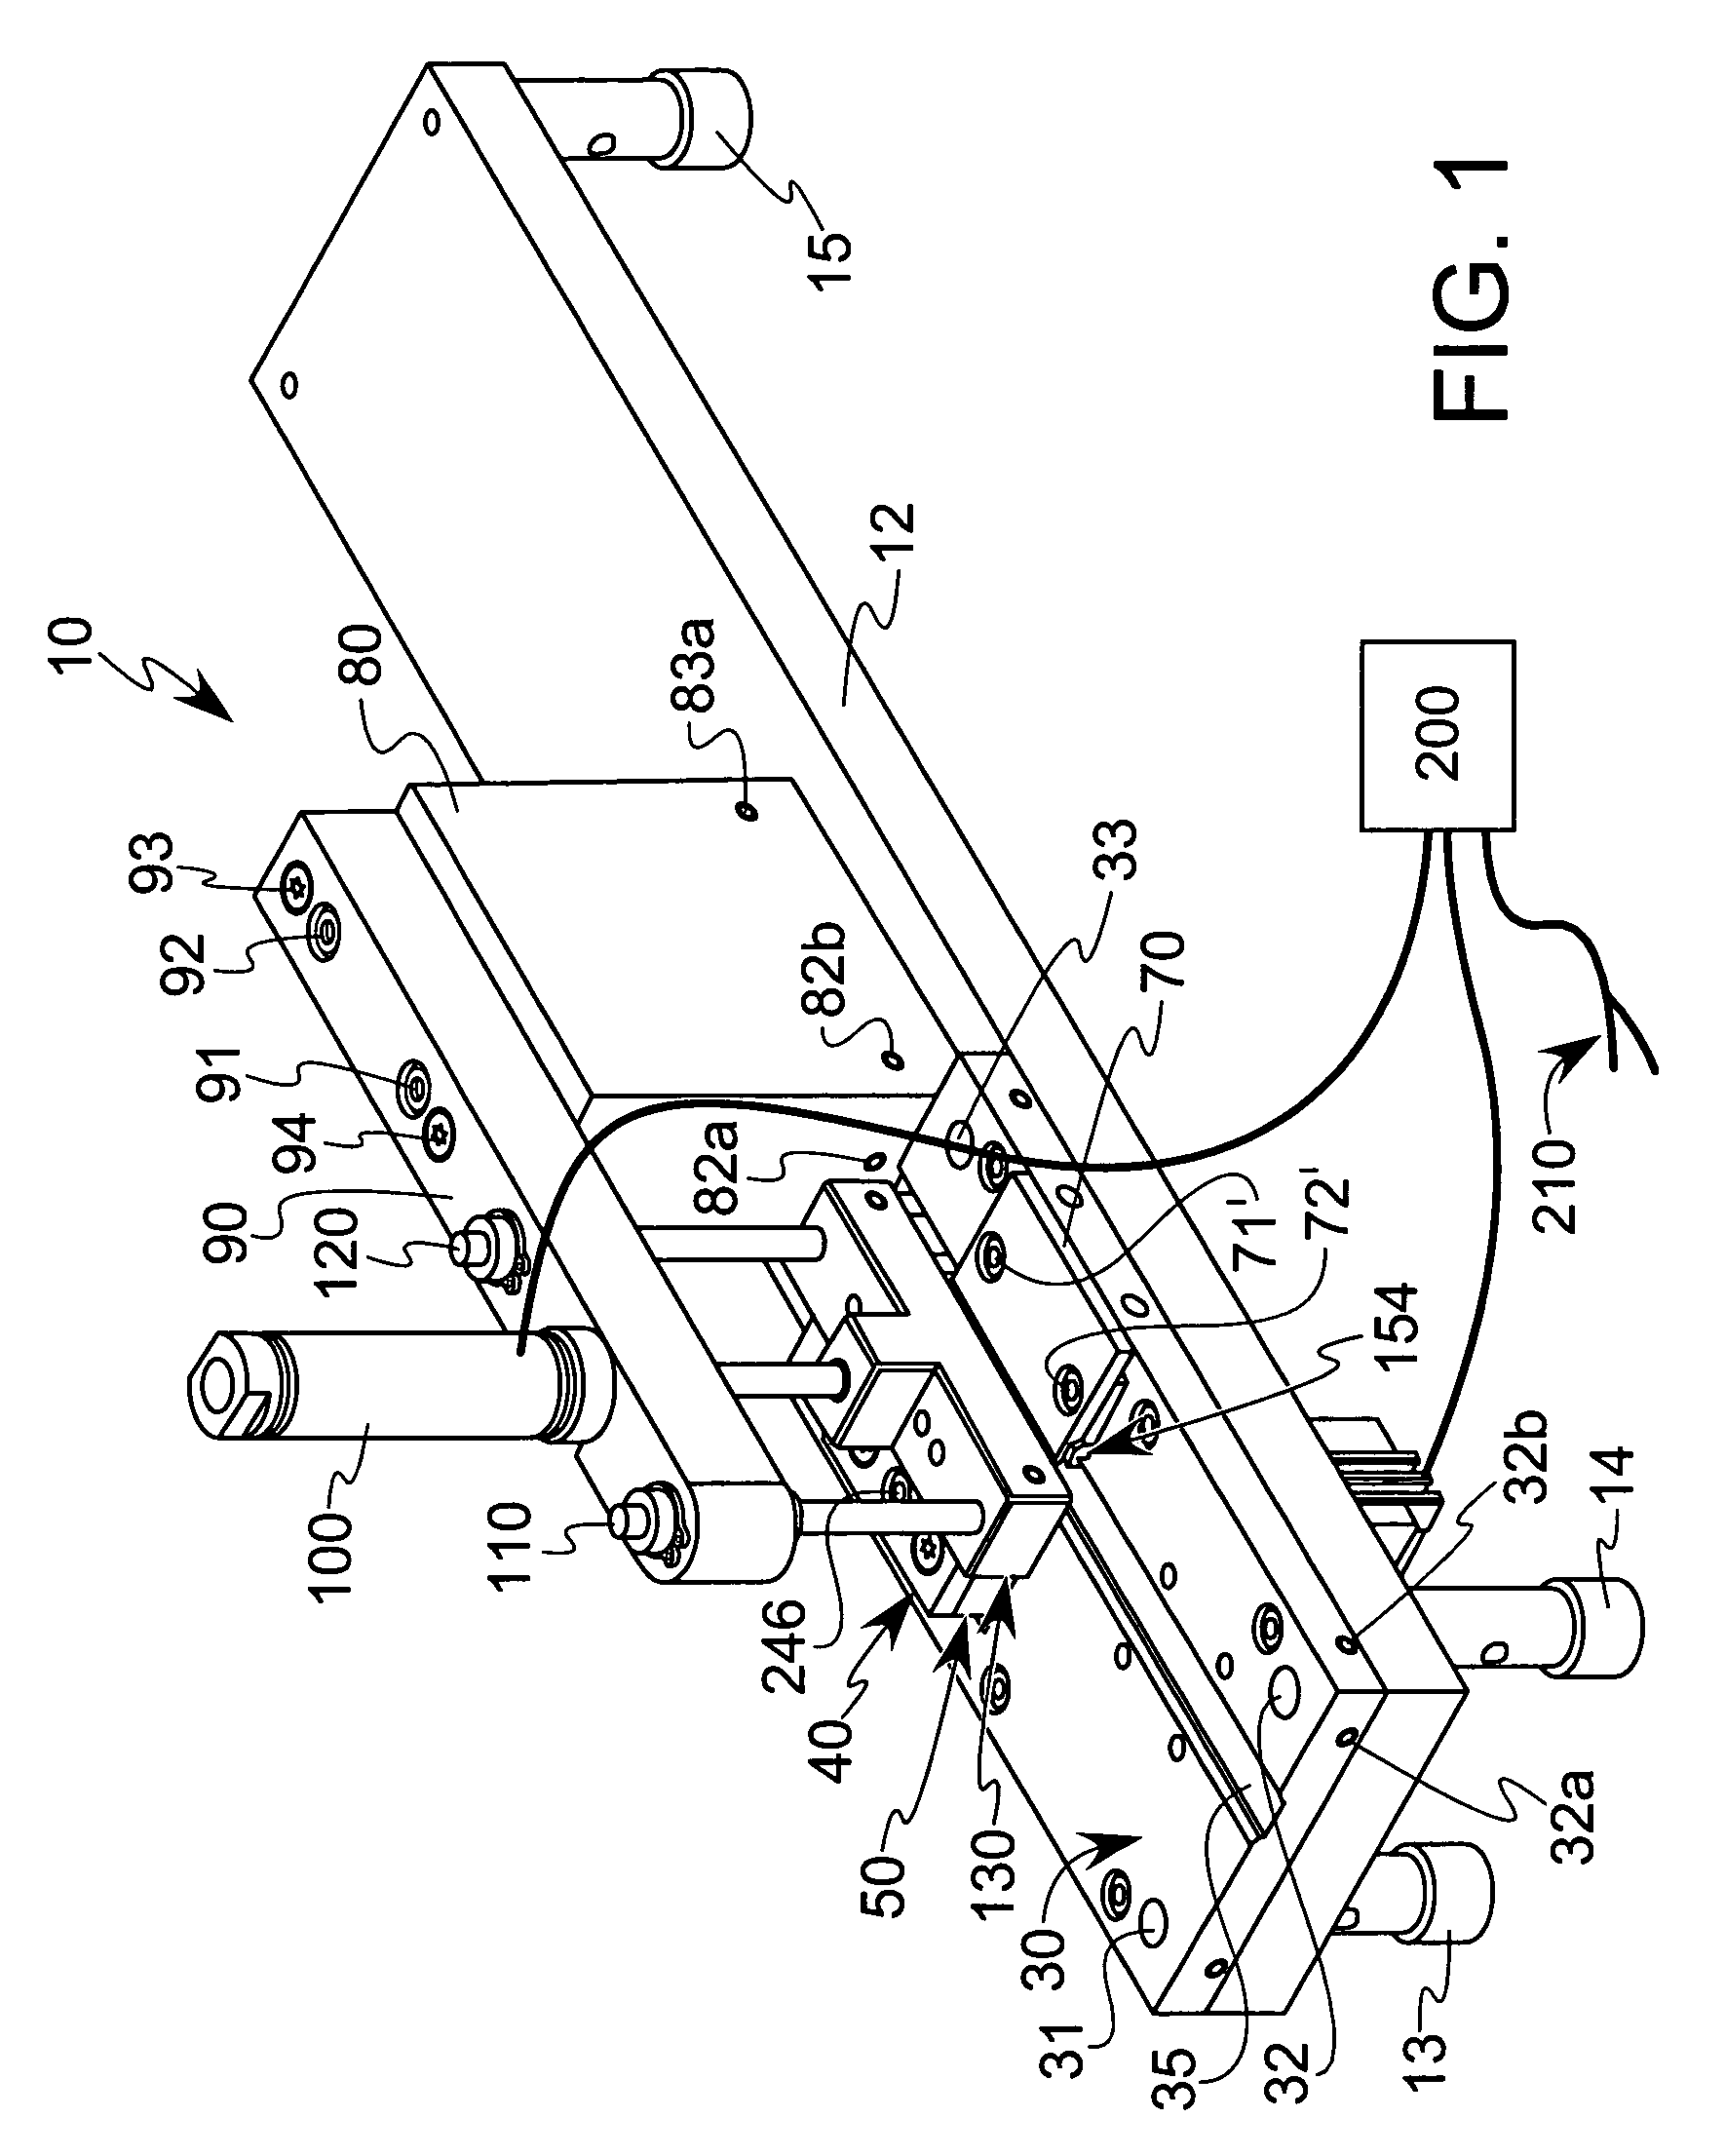 Apparatus and method for inserting staple drivers in a cartridge